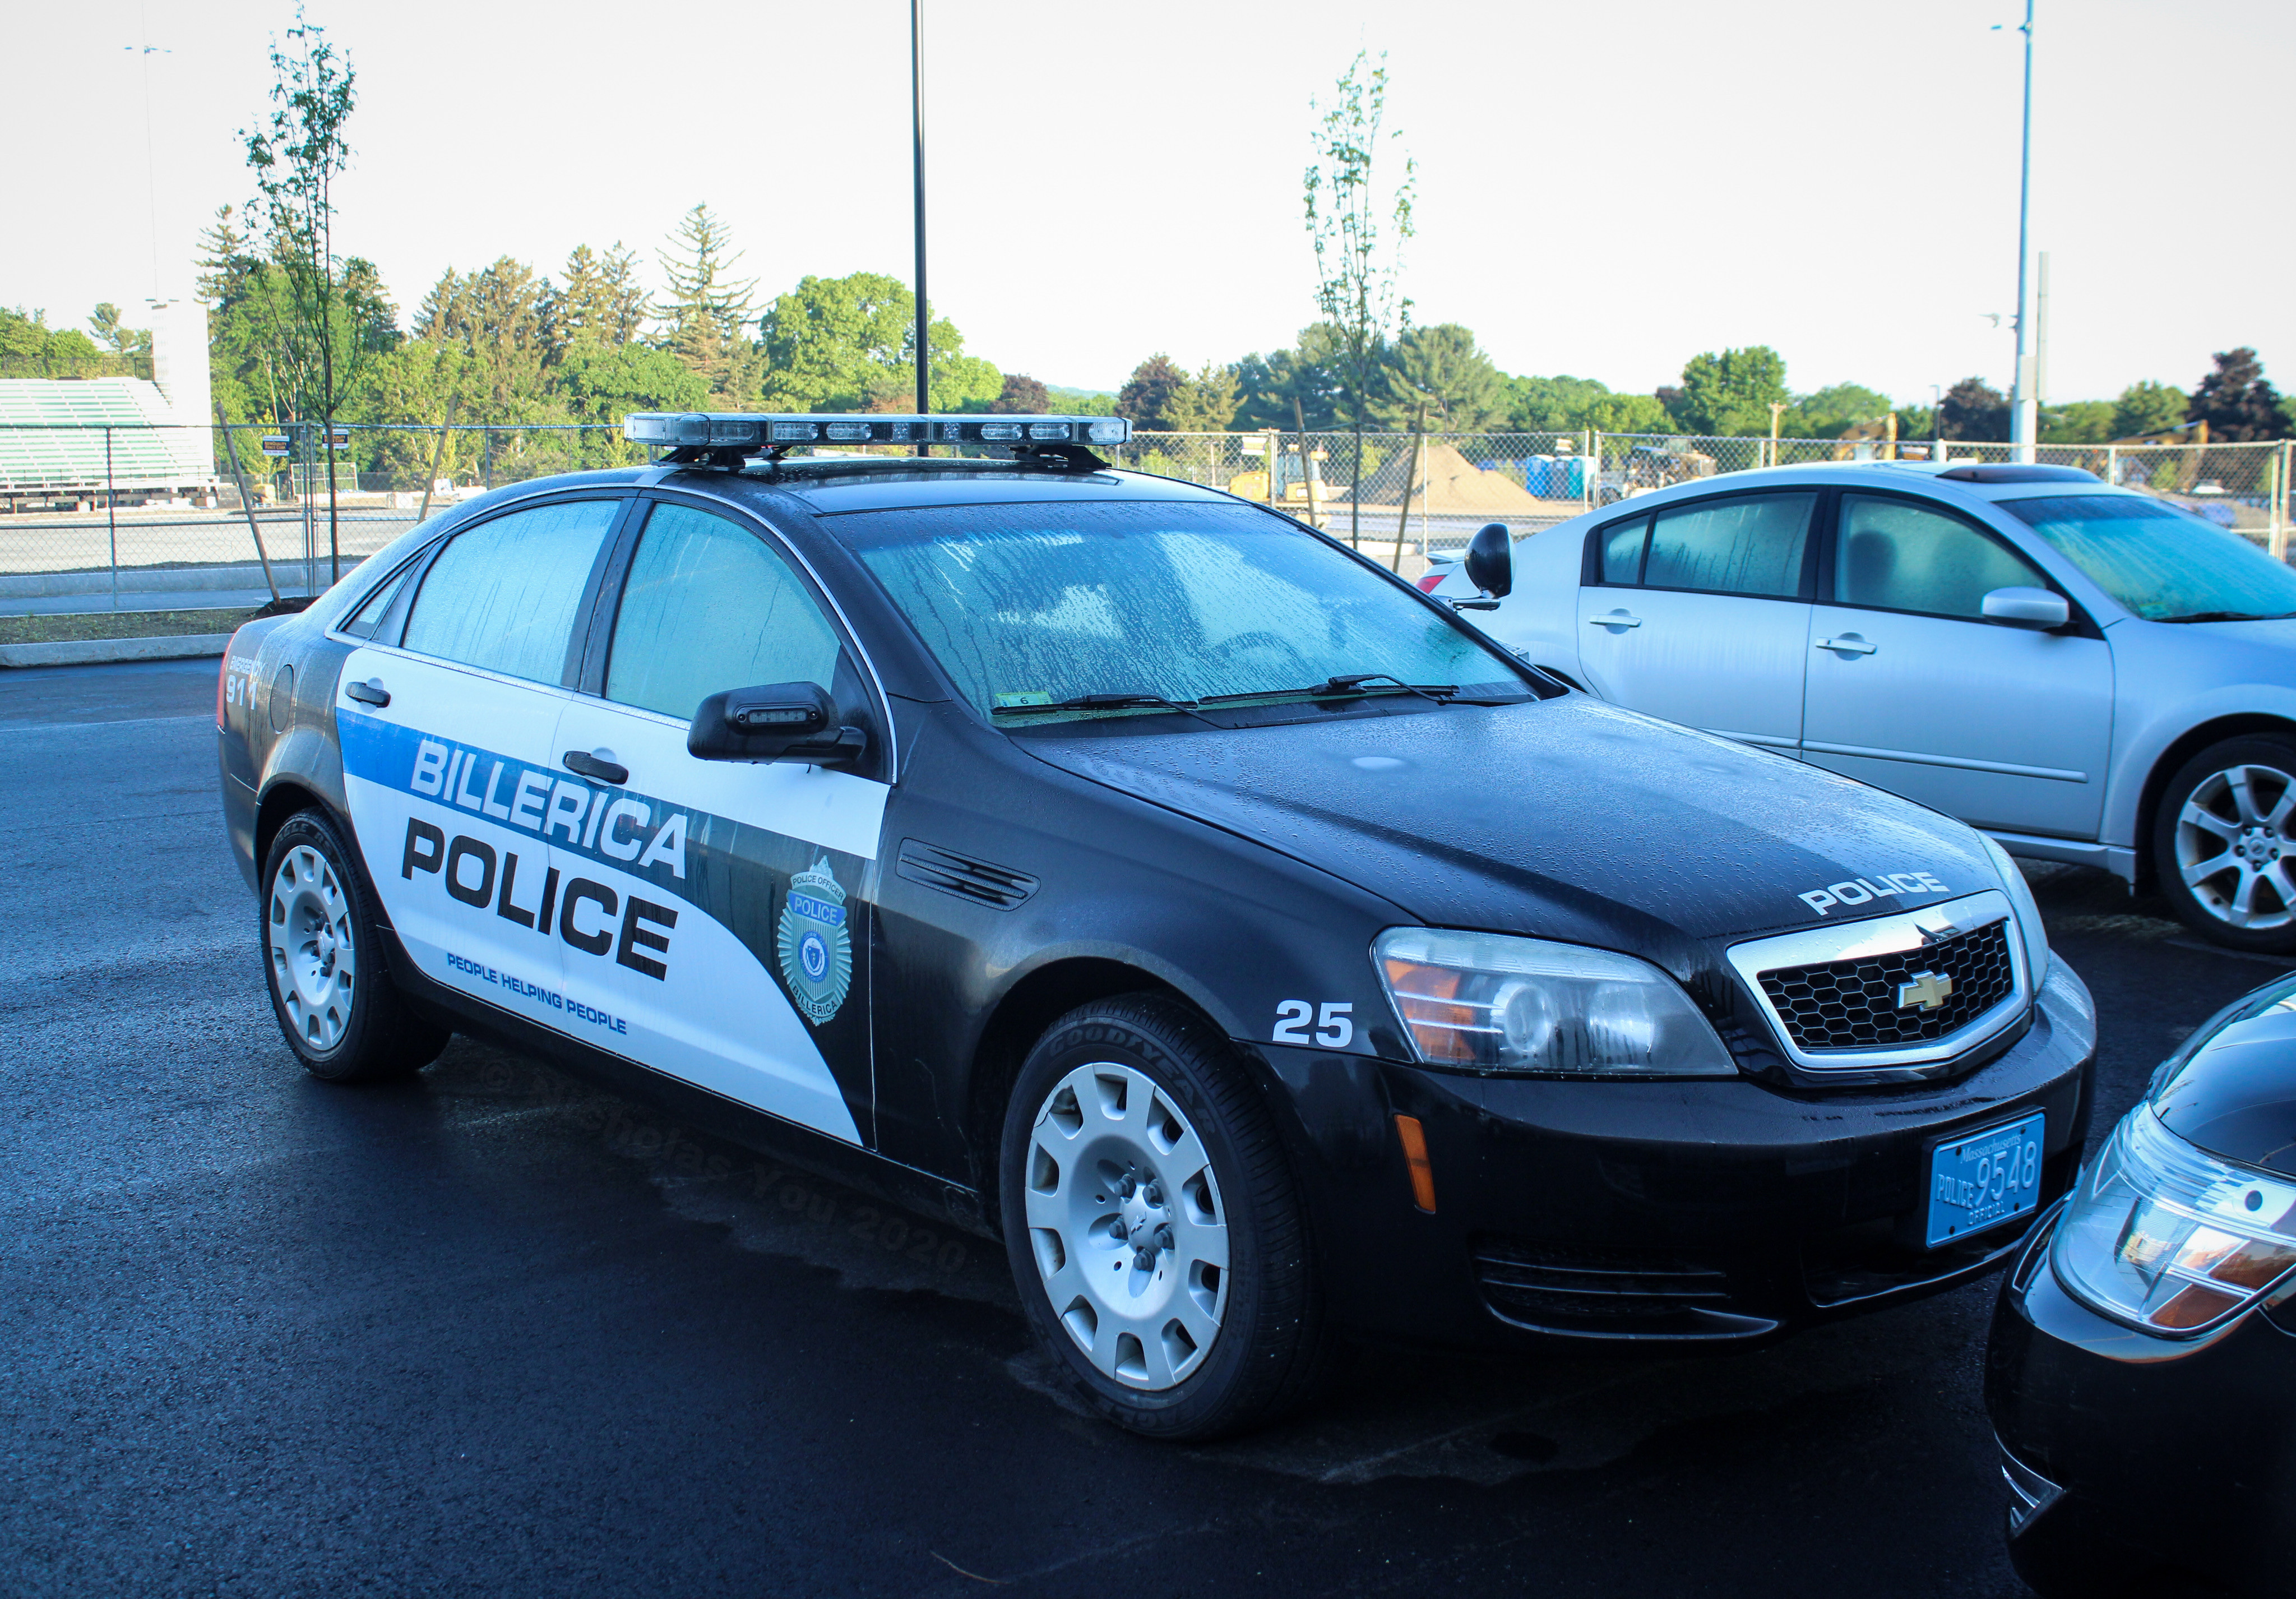 A photo  of Billerica Police
            Car 25, a 2012 Chevrolet Caprice             taken by Nicholas You